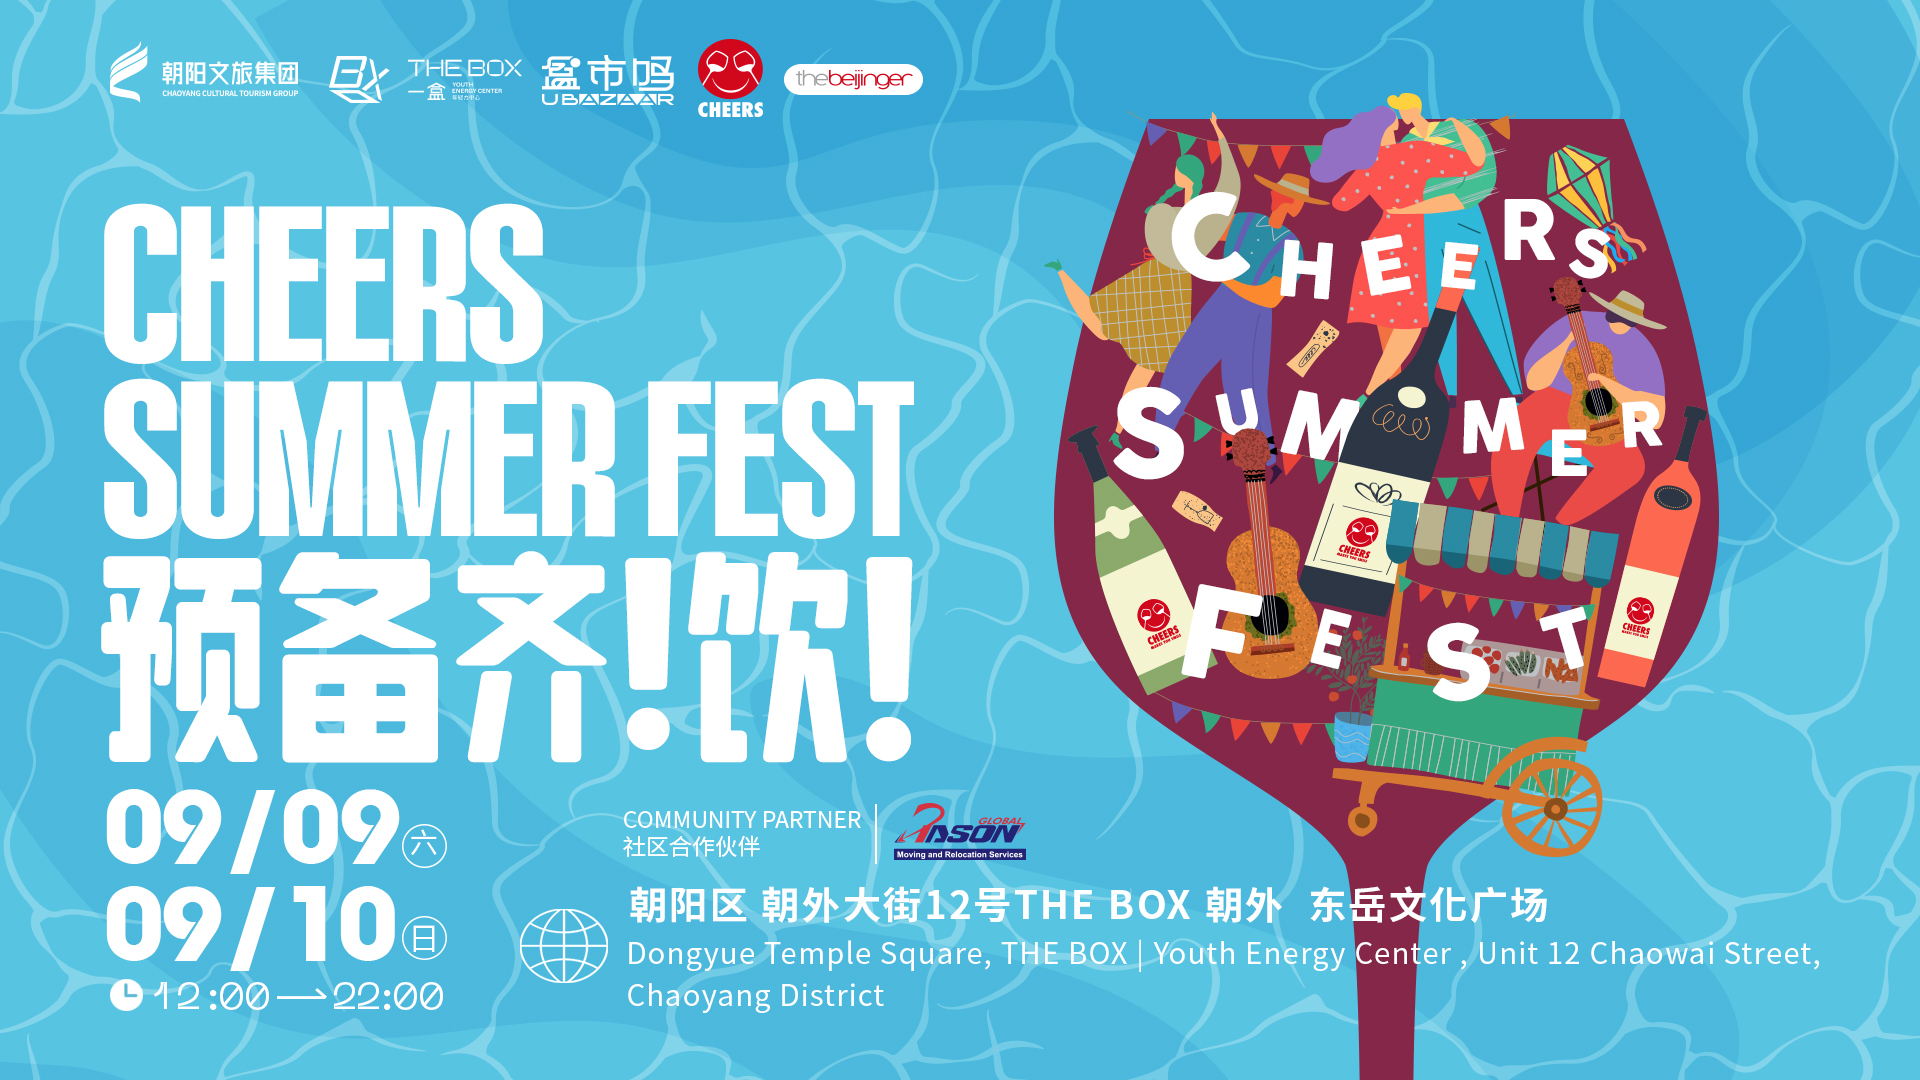 Save the Date – It’s Wine Time at CHEERS Summer Fest, Sep 9-10